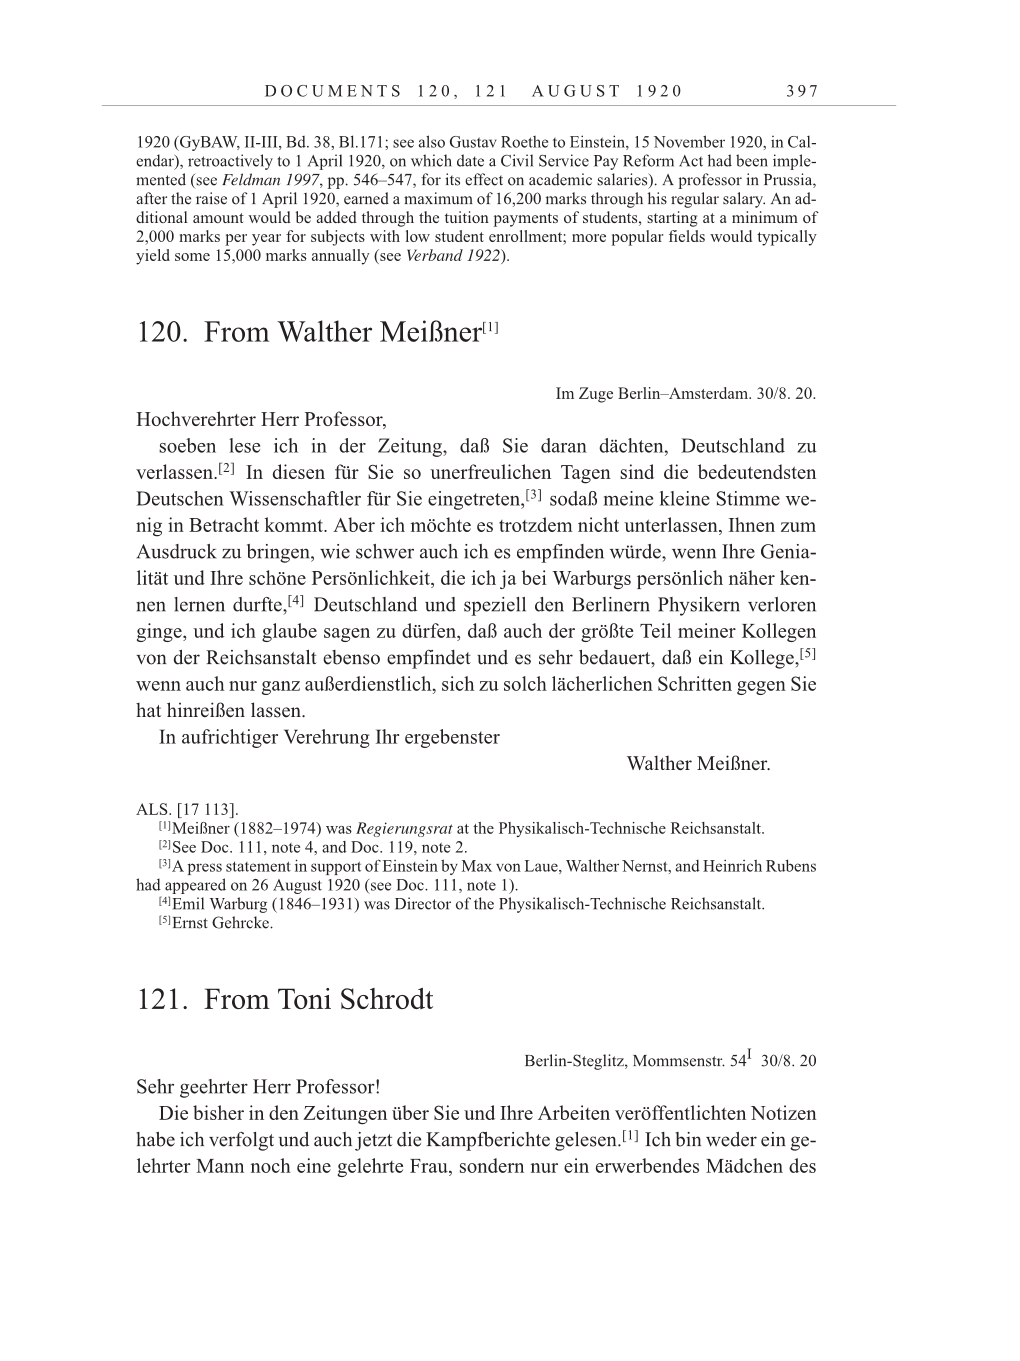 Volume 10: The Berlin Years: Correspondence May-December 1920 / Supplementary Correspondence 1909-1920 page 397